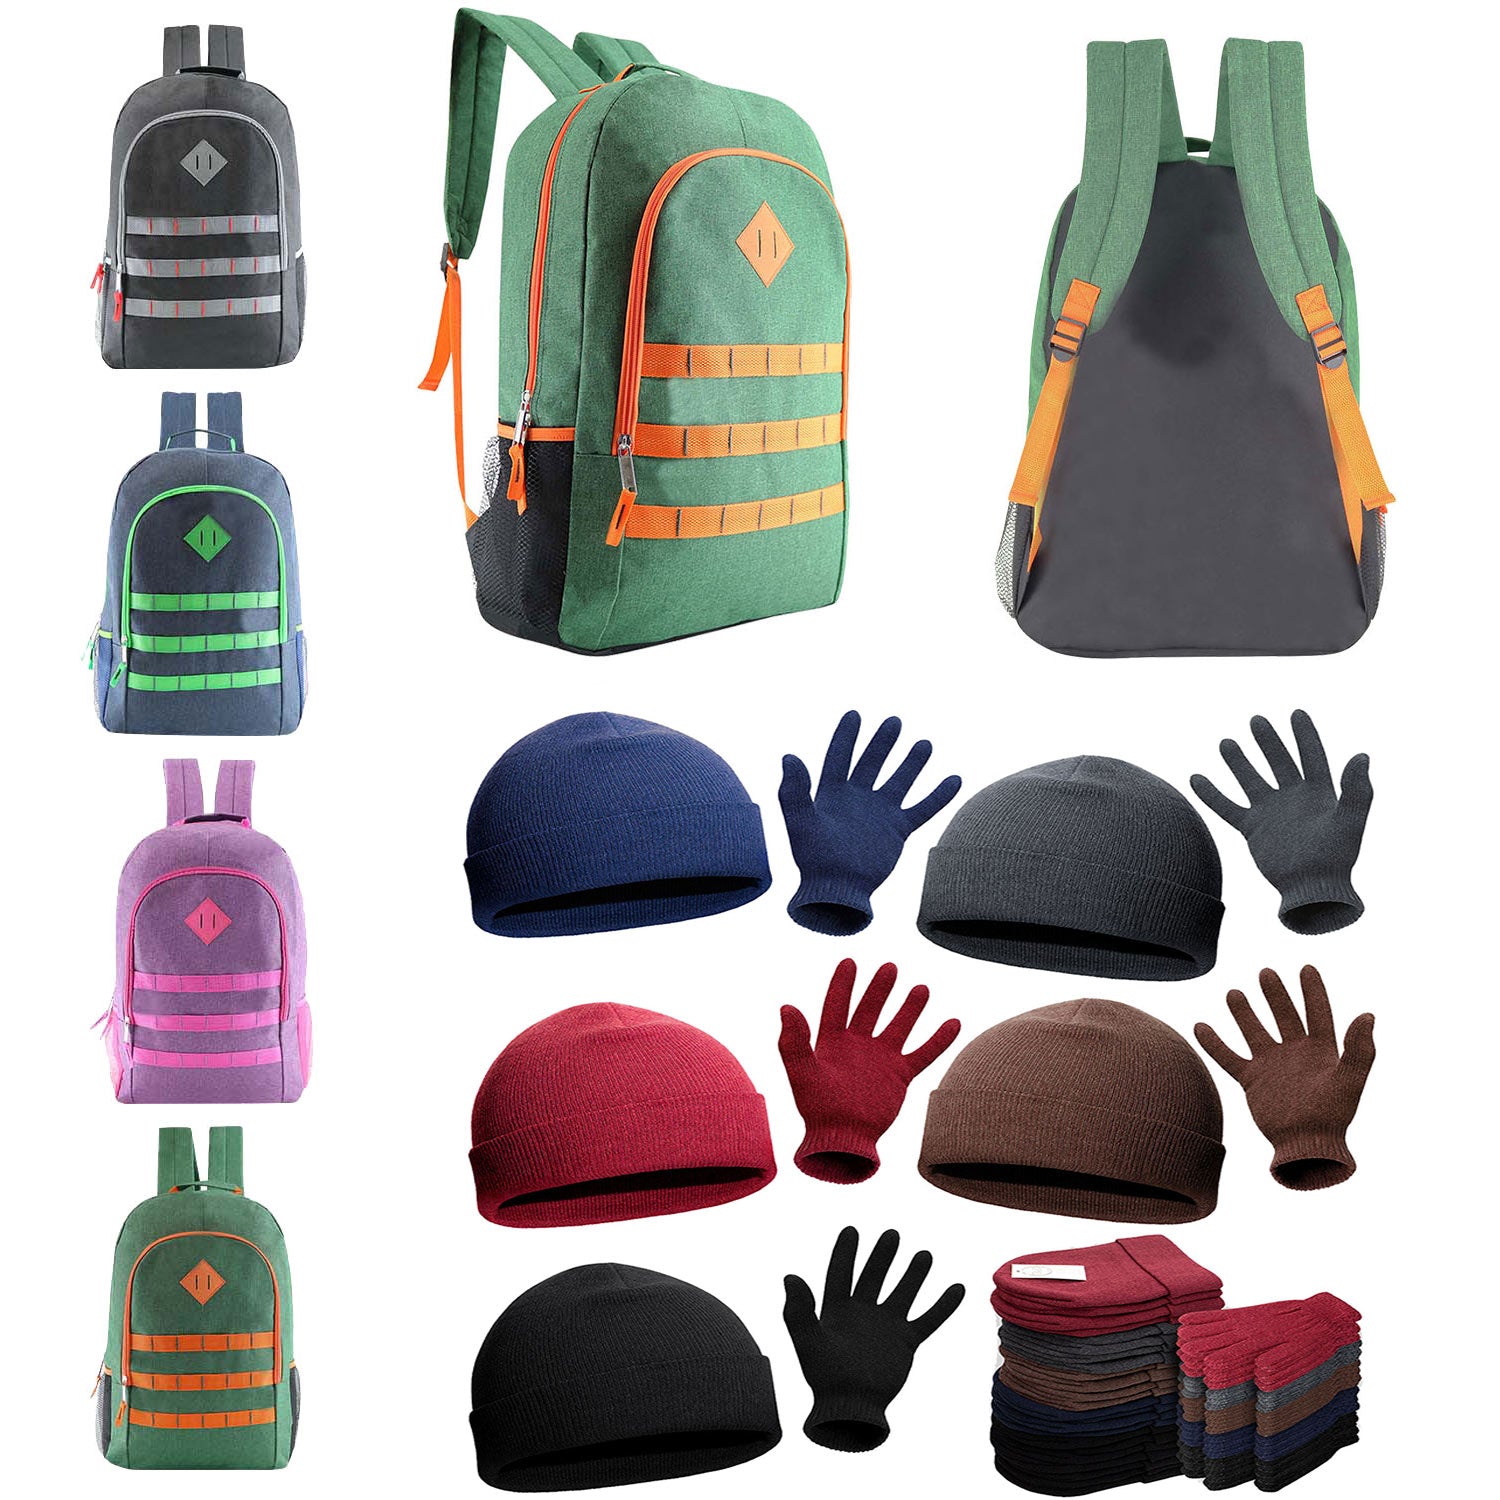 Bulk Case of 12 19" Backpacks and 12 Winter Item Sets - Wholesale Care Package - Emergencies, Homeless, Charity